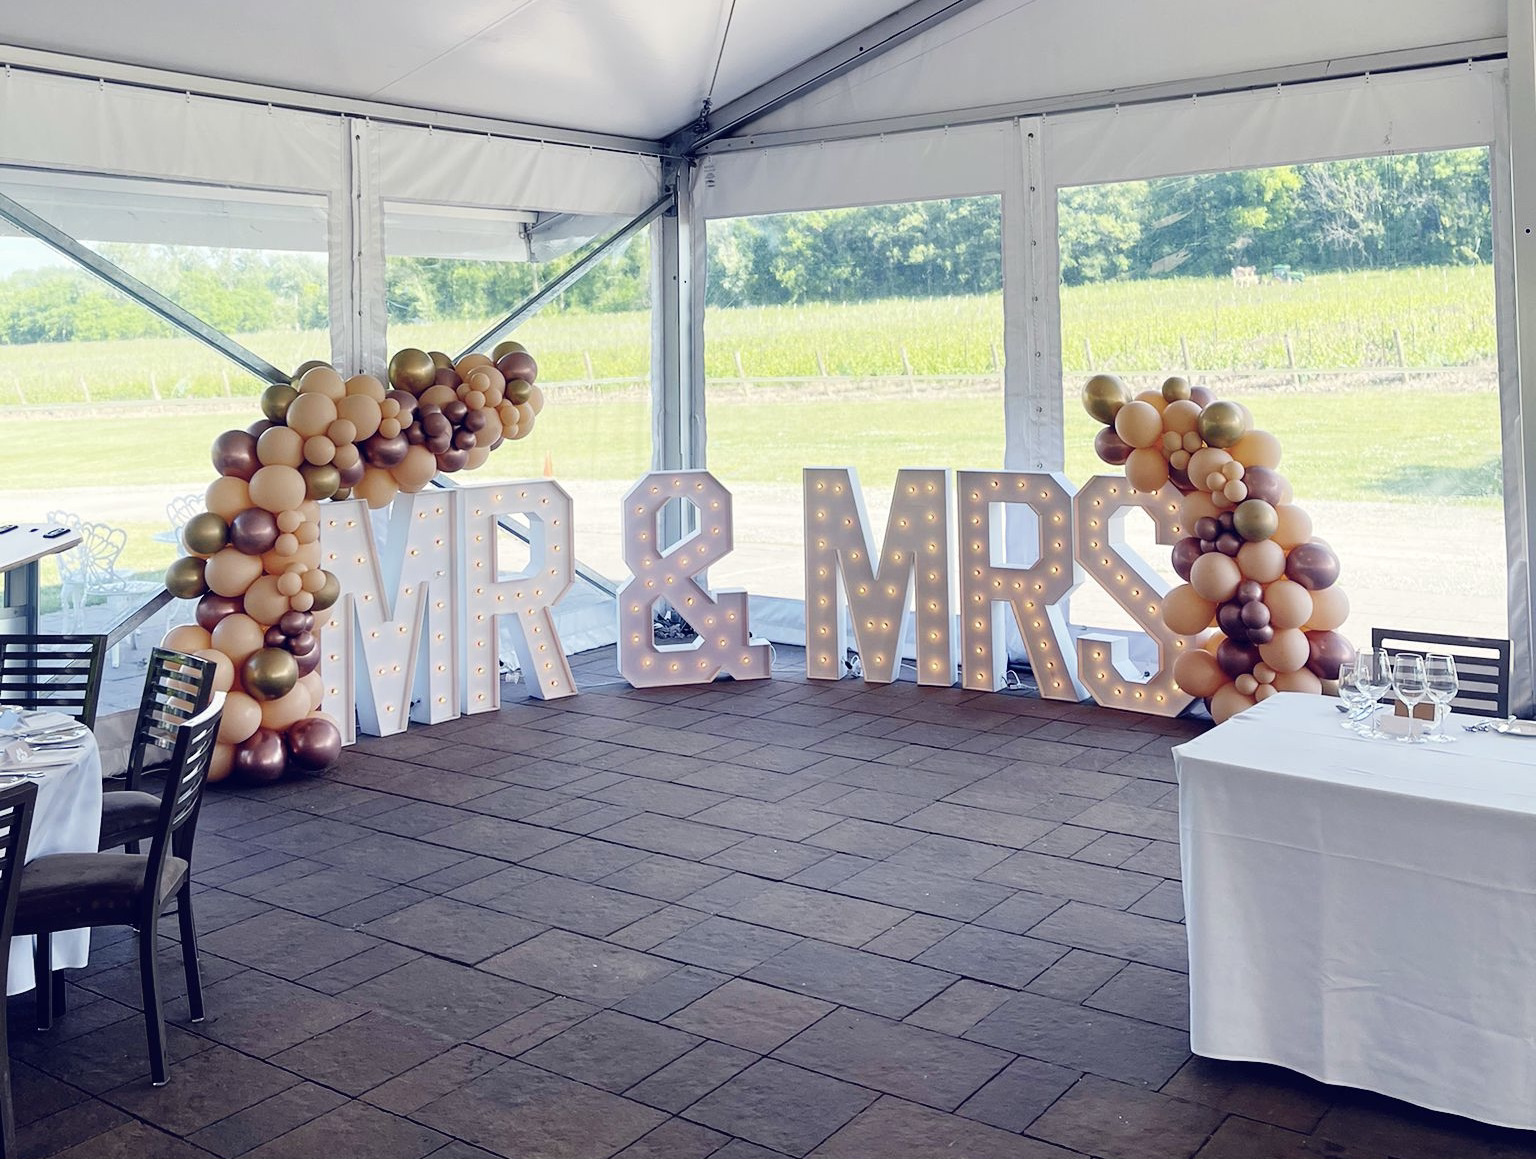 Corporate Event Decoration Ideas - Marquee Letters - Balloon Decorations